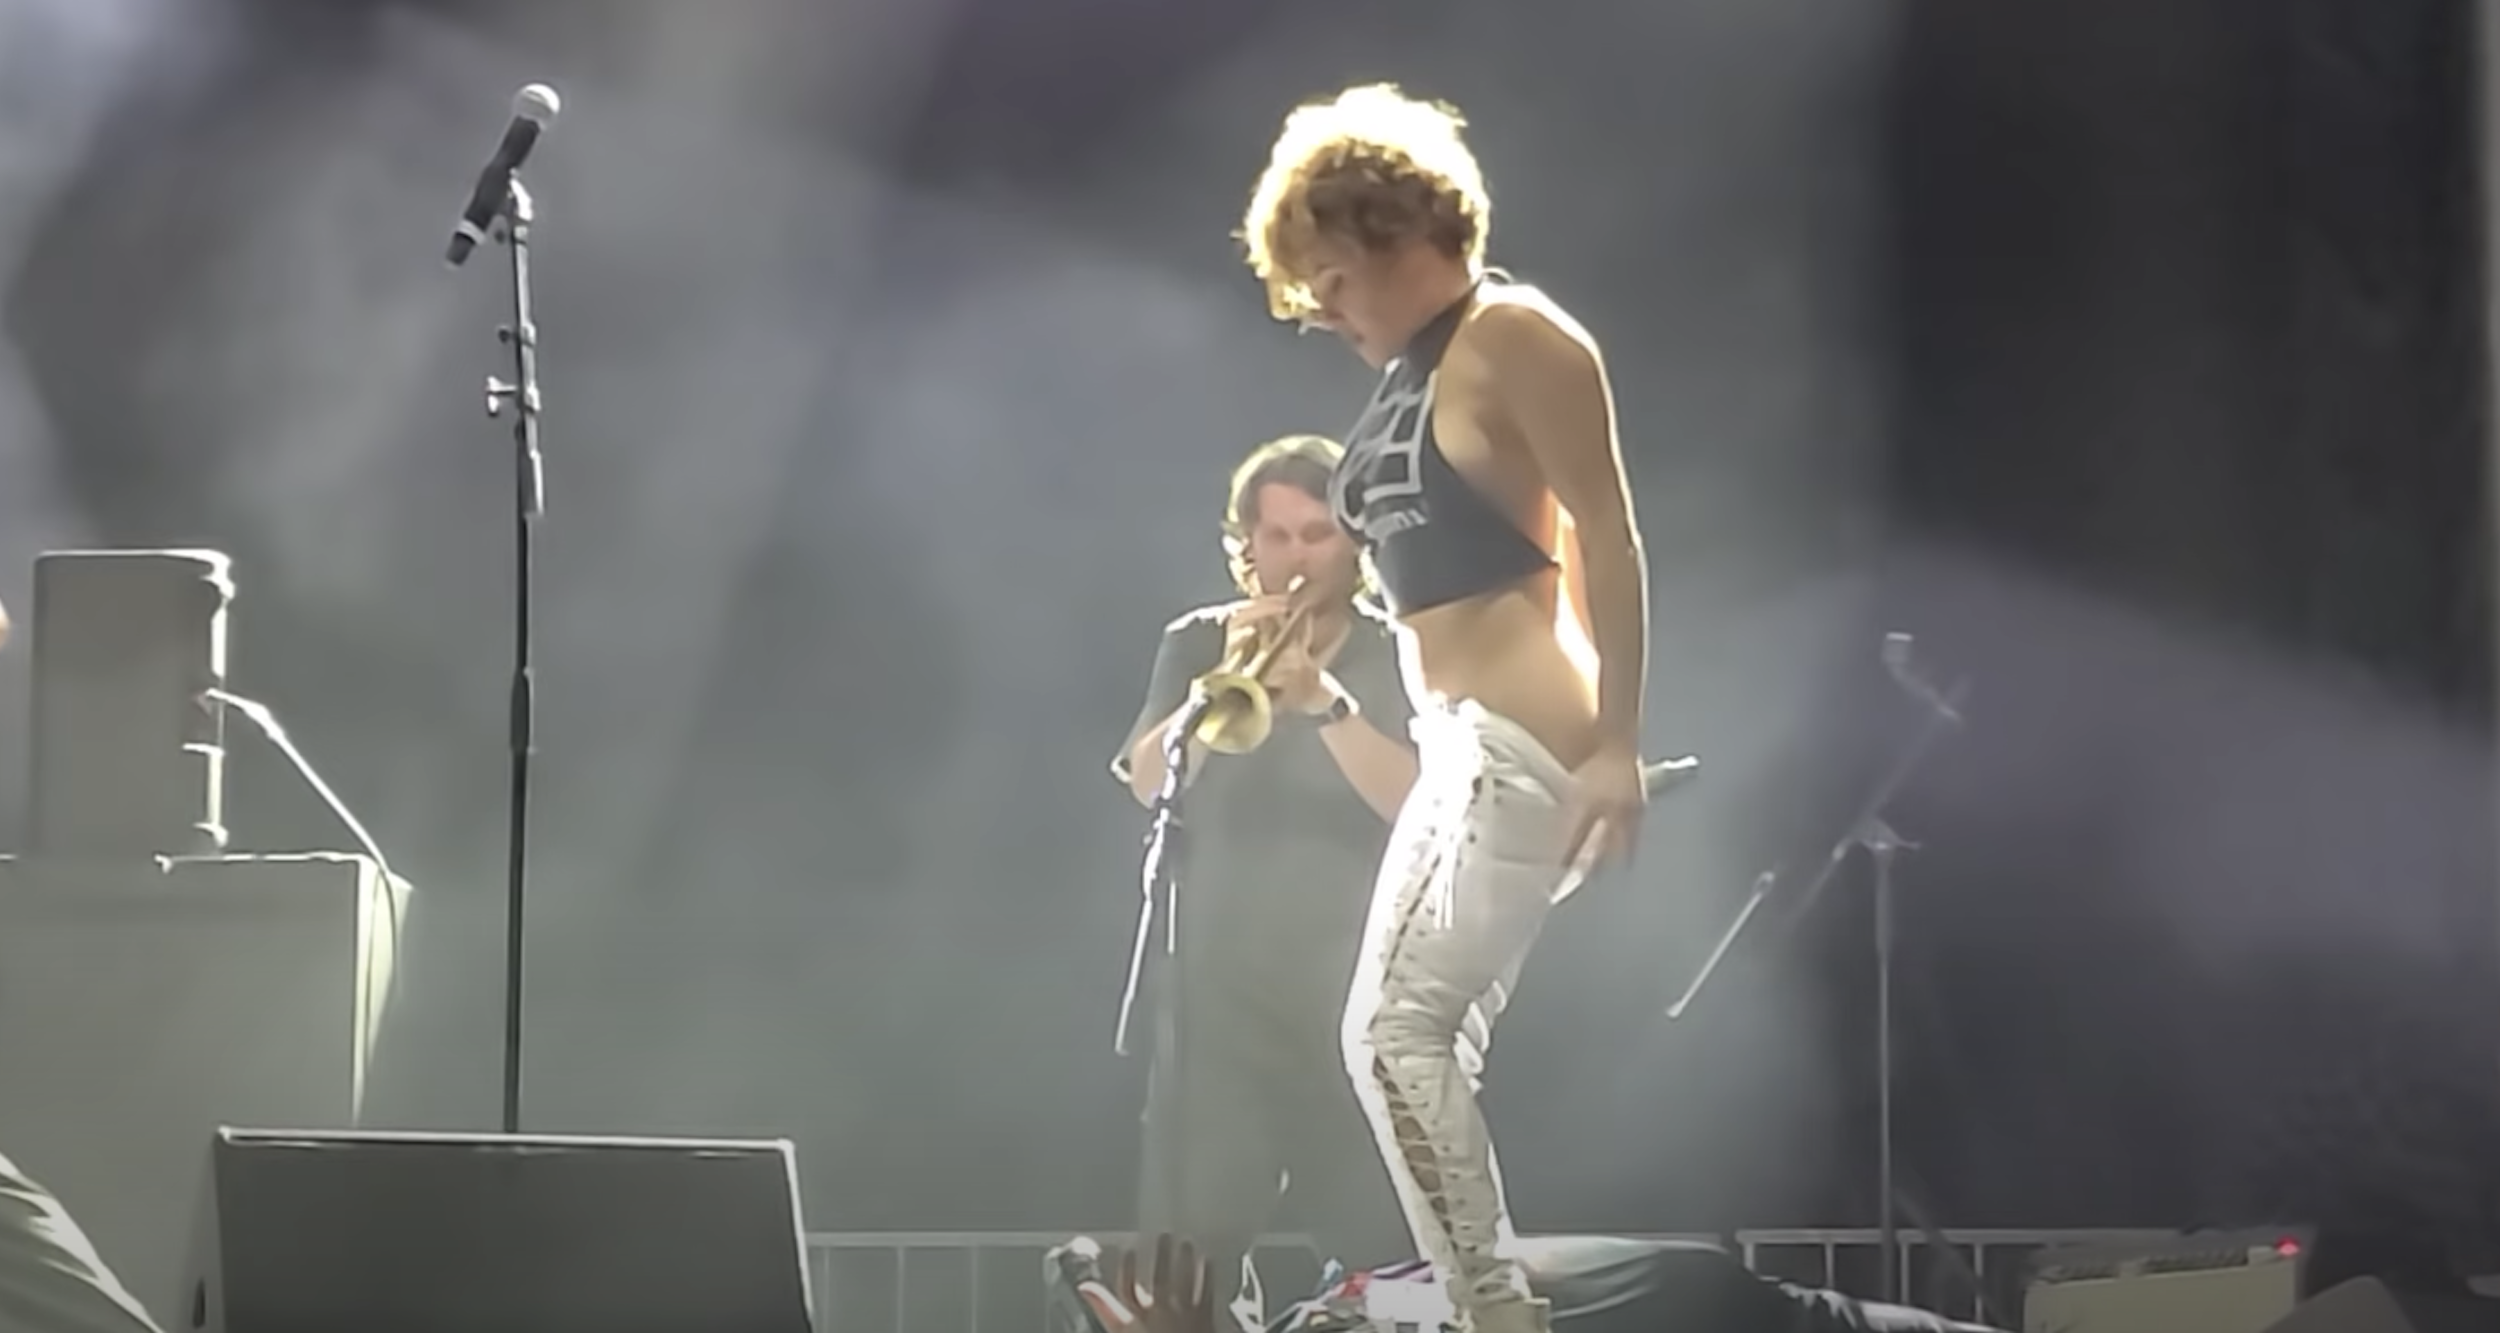 Pissing on stage